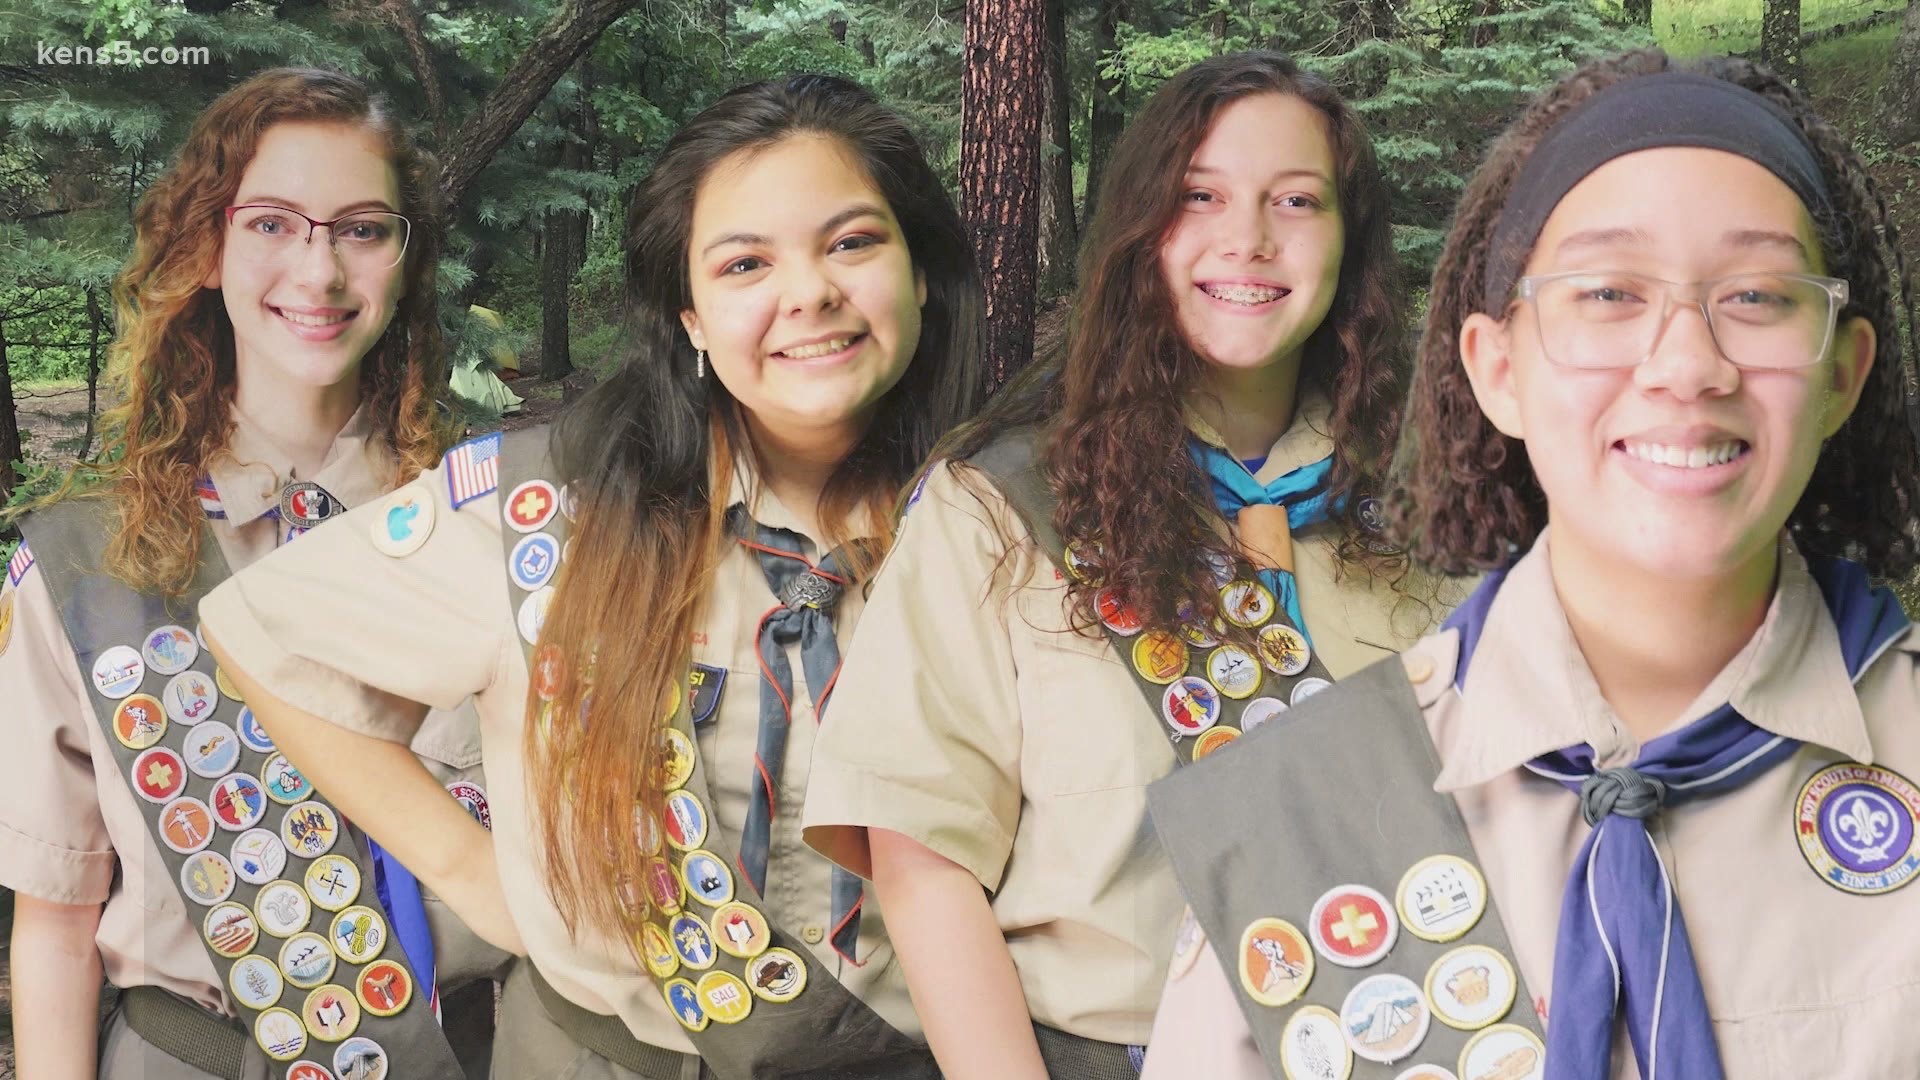 Only 6% of scouts attain Eagle Scout.  They have to progress through Scouting's seven ranks, earn at least 21 merit badges and serve in leadership positions.